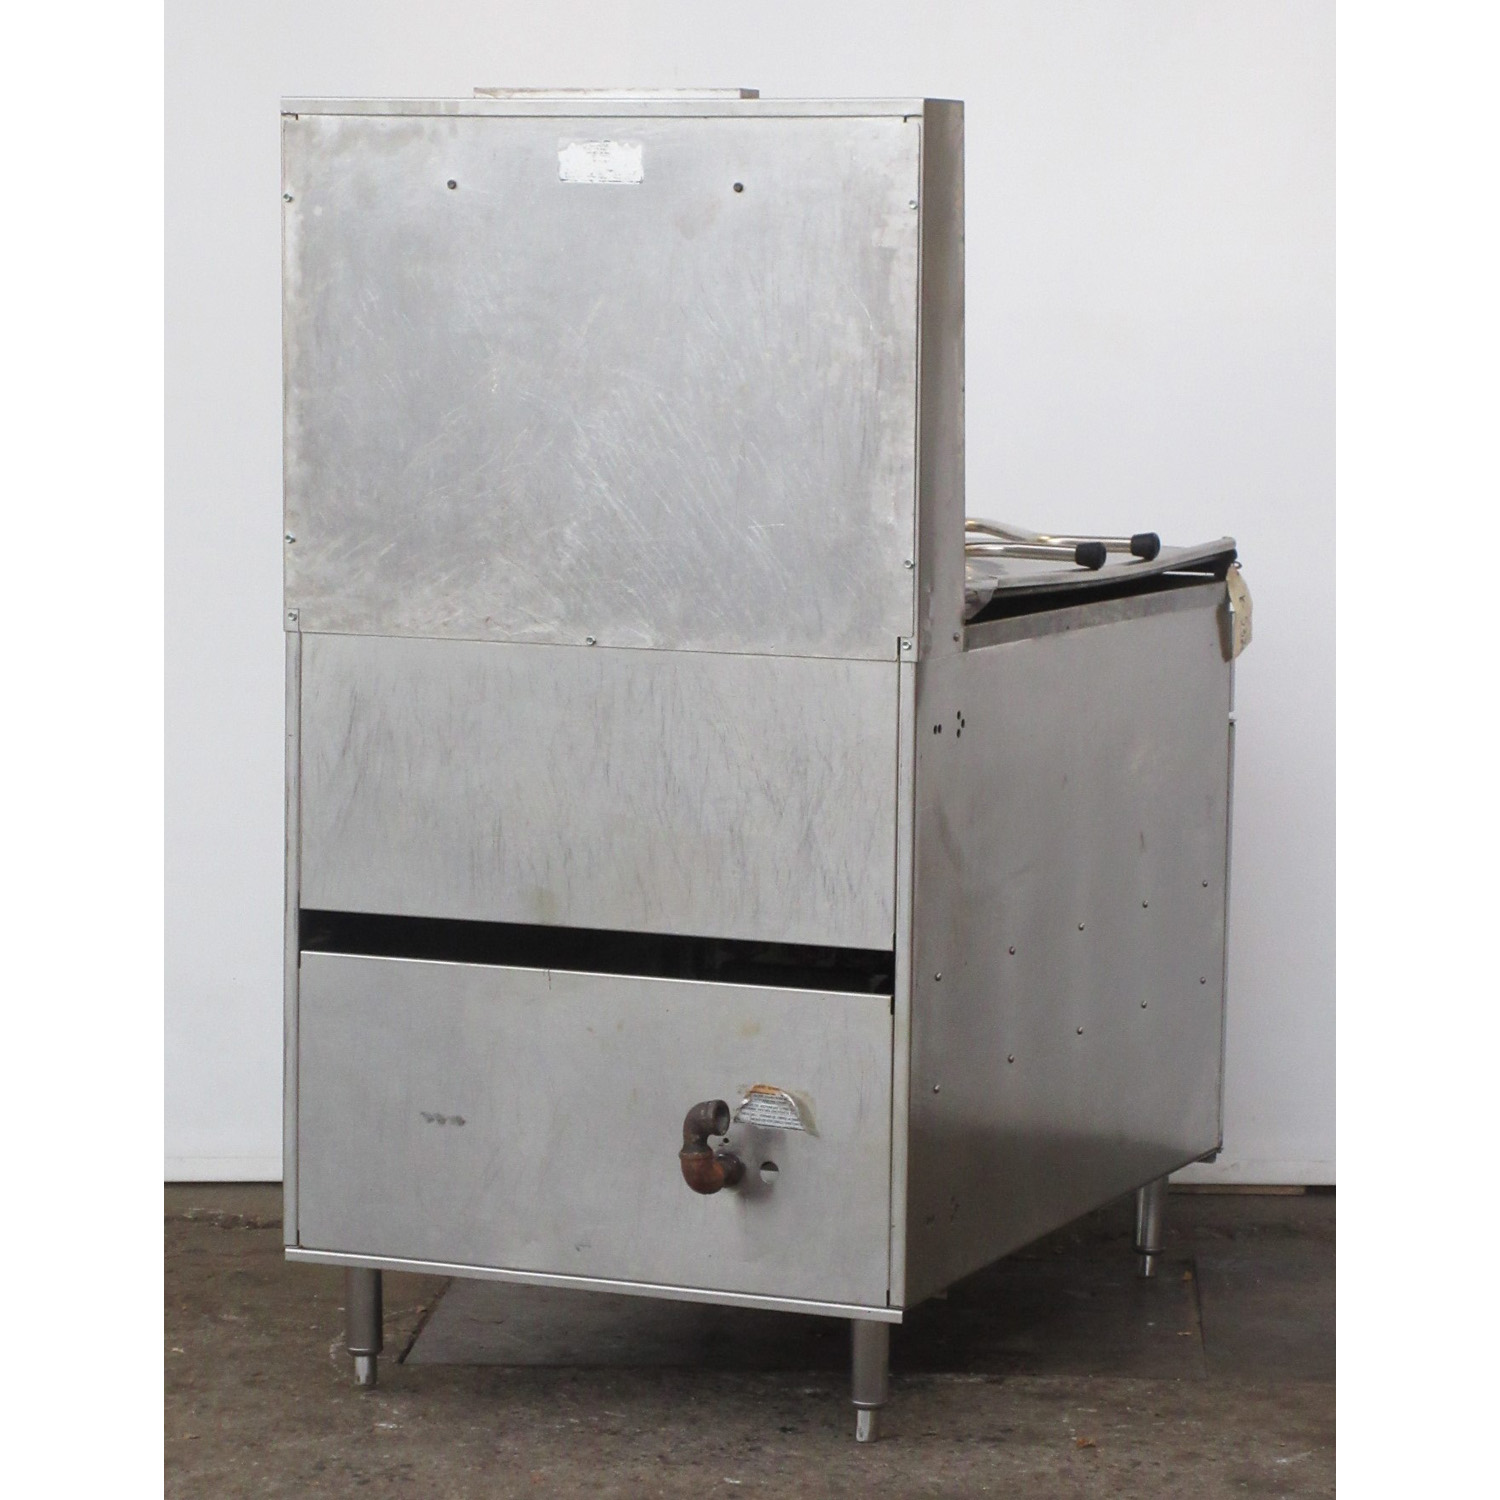 Pitco 24P 24 Donut Gas Fryer, Used Excellent Condition image 5